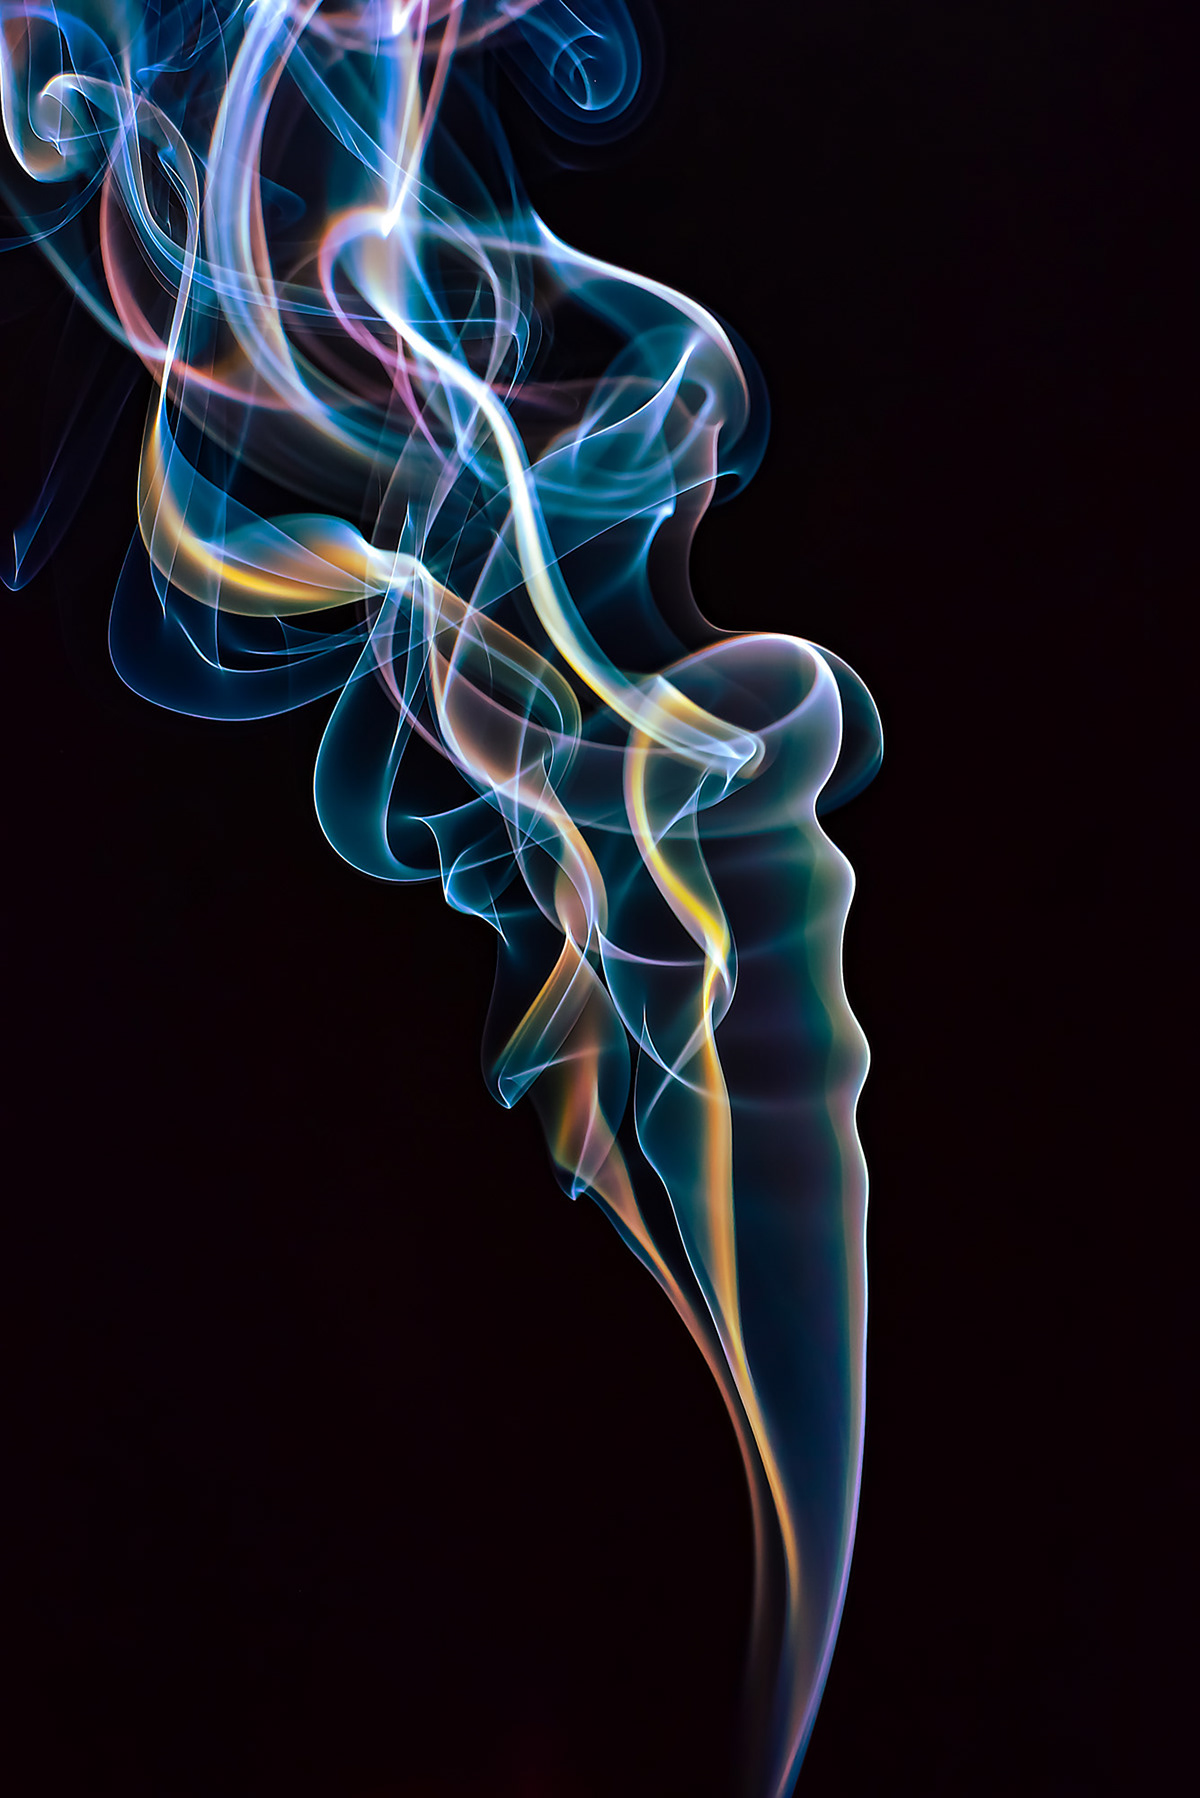 smoke Incense DANCE   Photography  photographer experimental colours pattern shapes